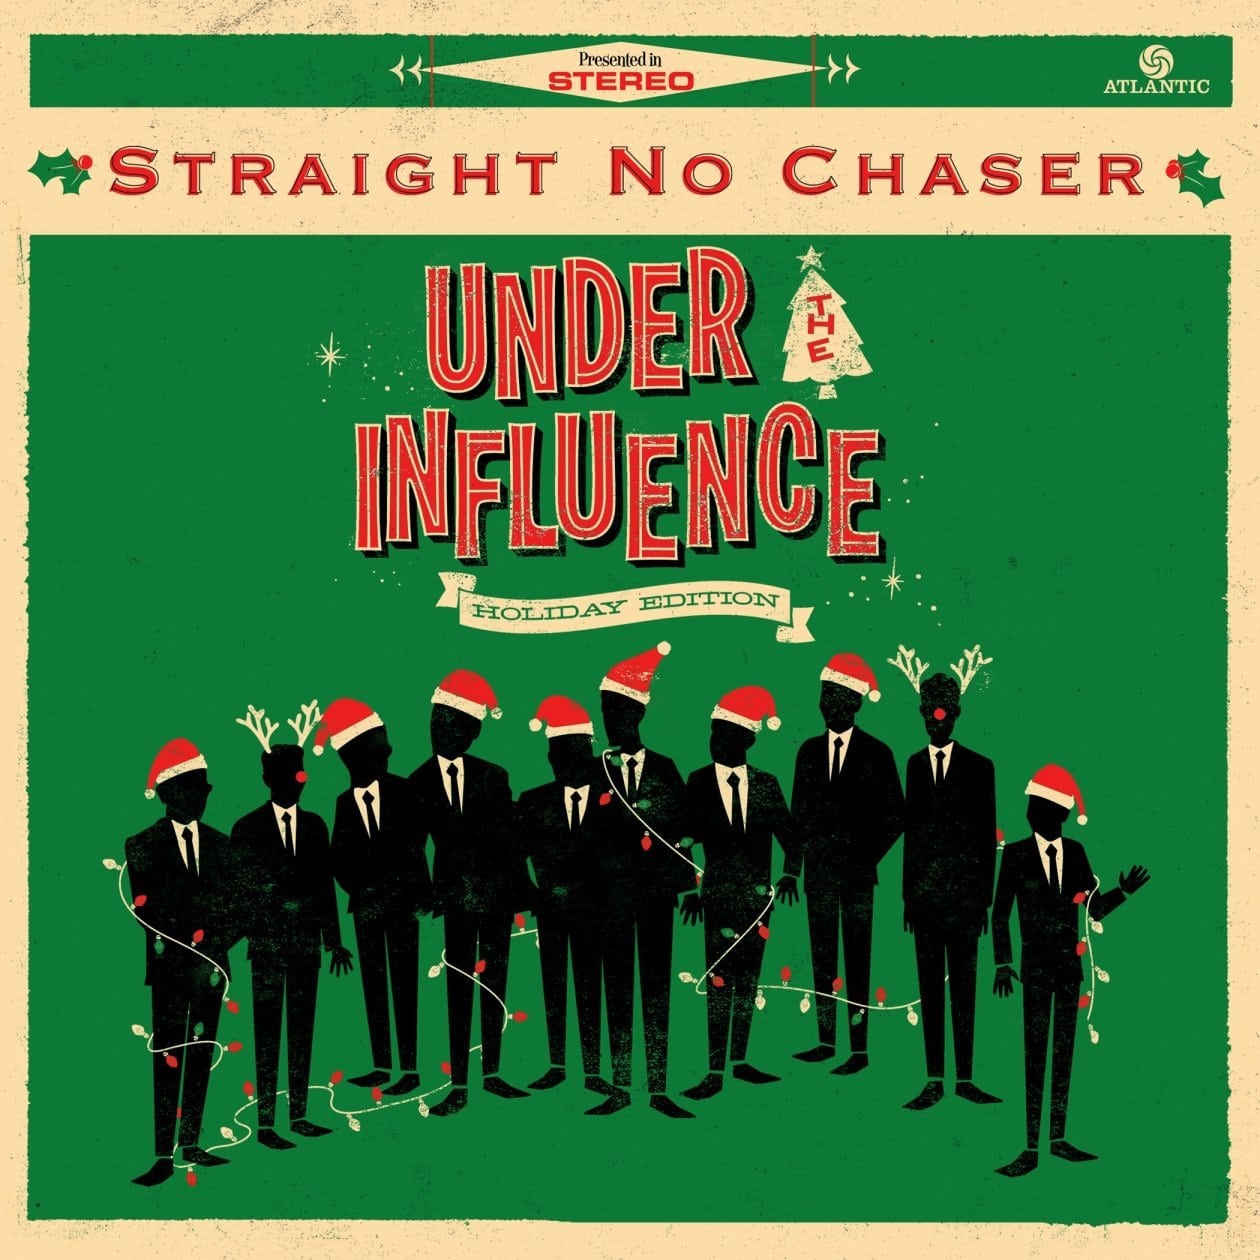 Christmas music favorites Straight No Chaser